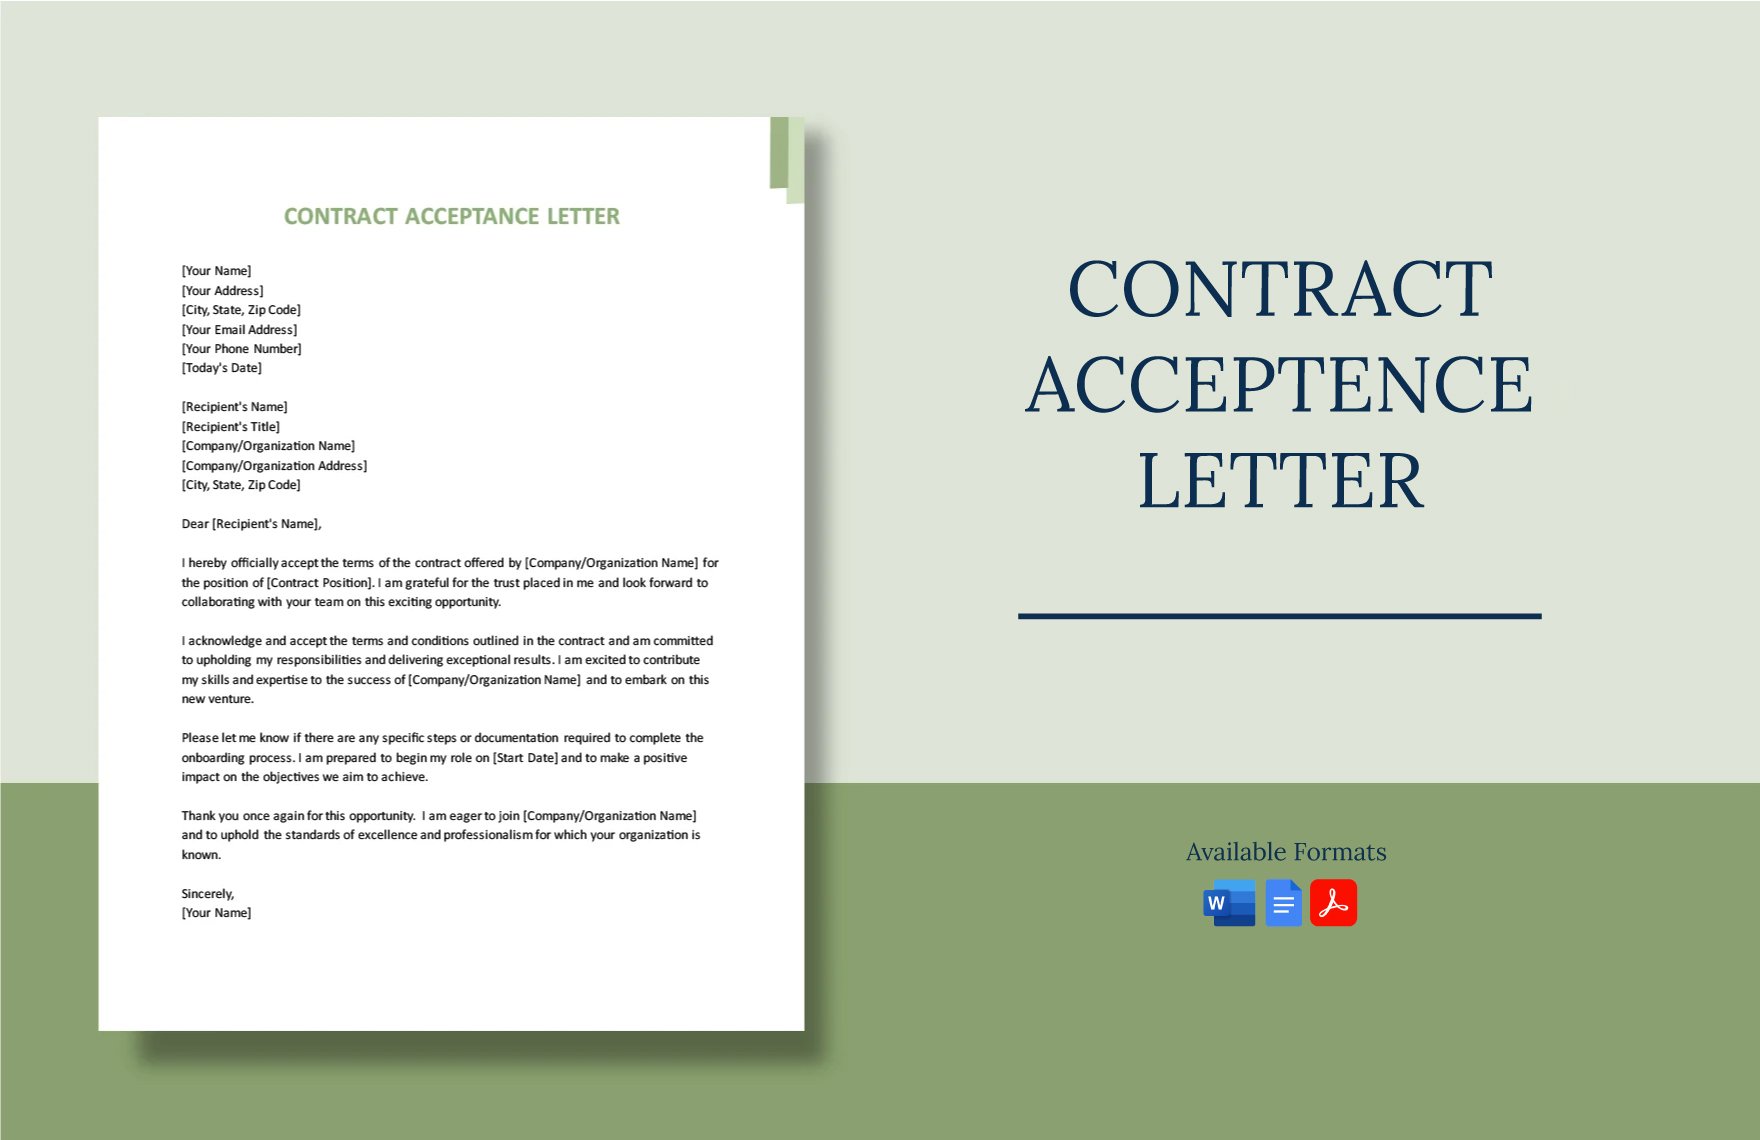 Contract Acceptance Letter in Word, Google Docs, PDF